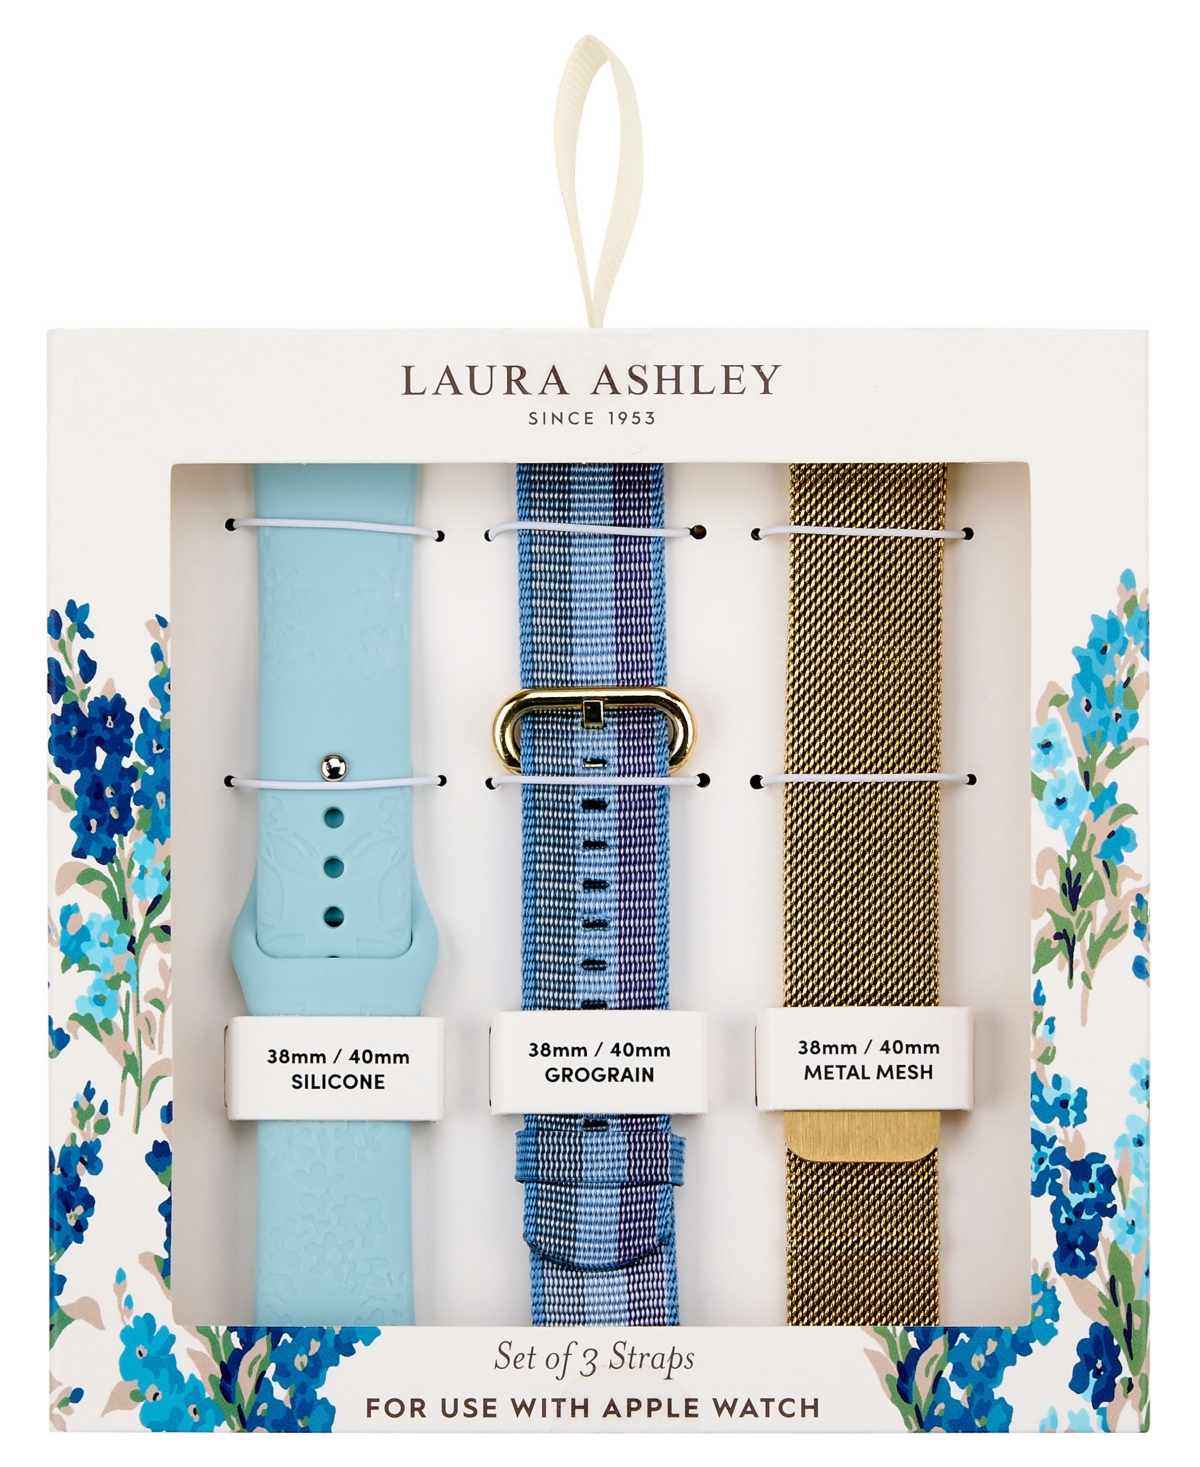 Women's Gold-Tone Mesh, Blue Grosgrain and Blue Silicone Strap Sets Compatible with Apple Watch 38mm, 40mm, 41mm - Multi